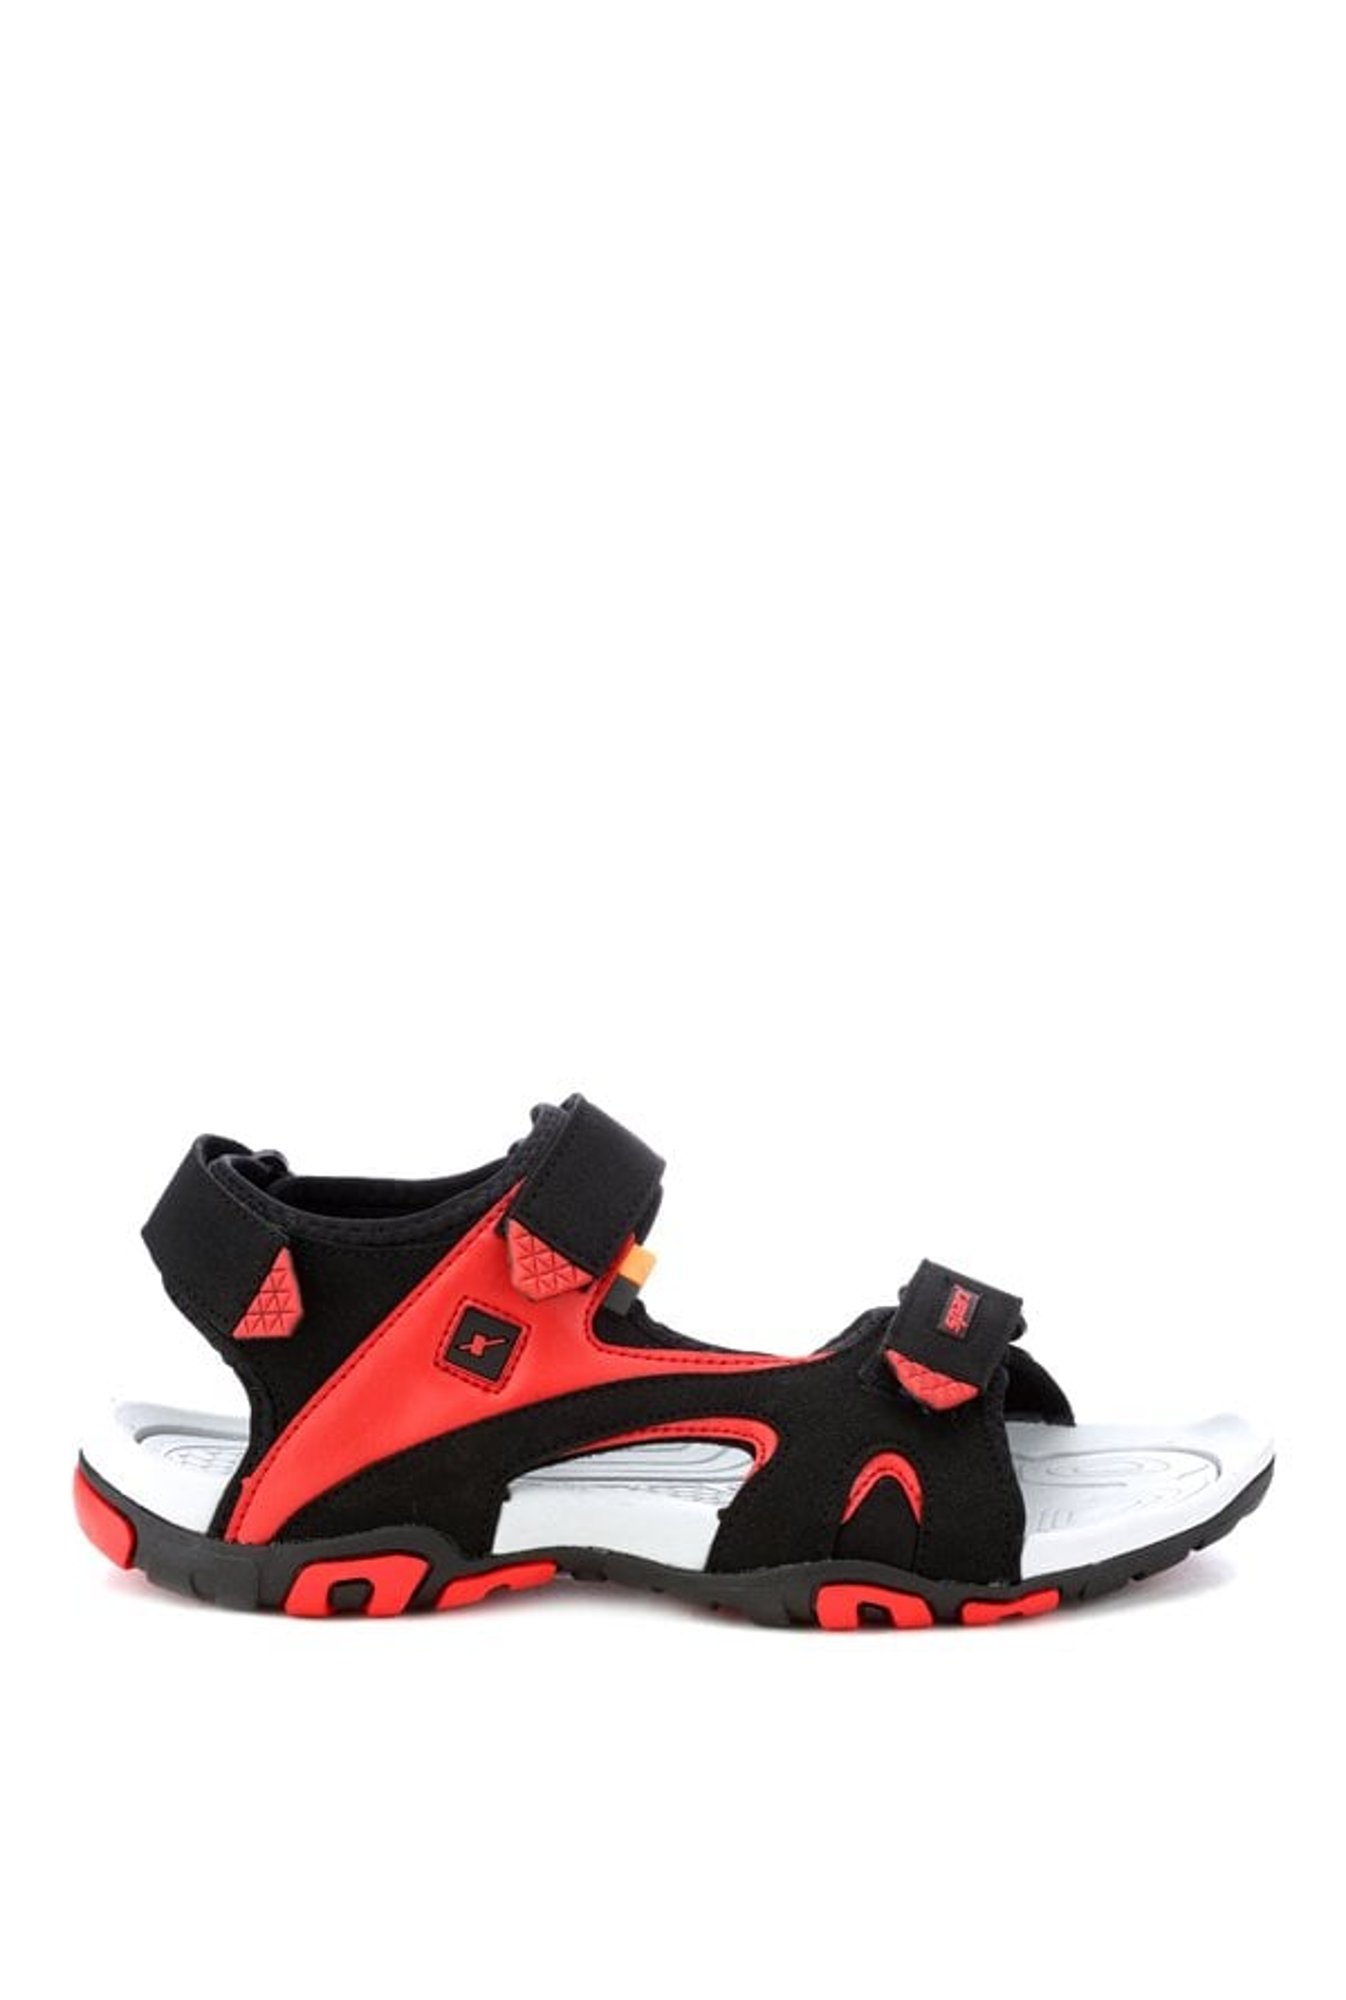 Buy Sparx Black & Red Floater Sandals for Men at Best Price @ Tata CLiQ